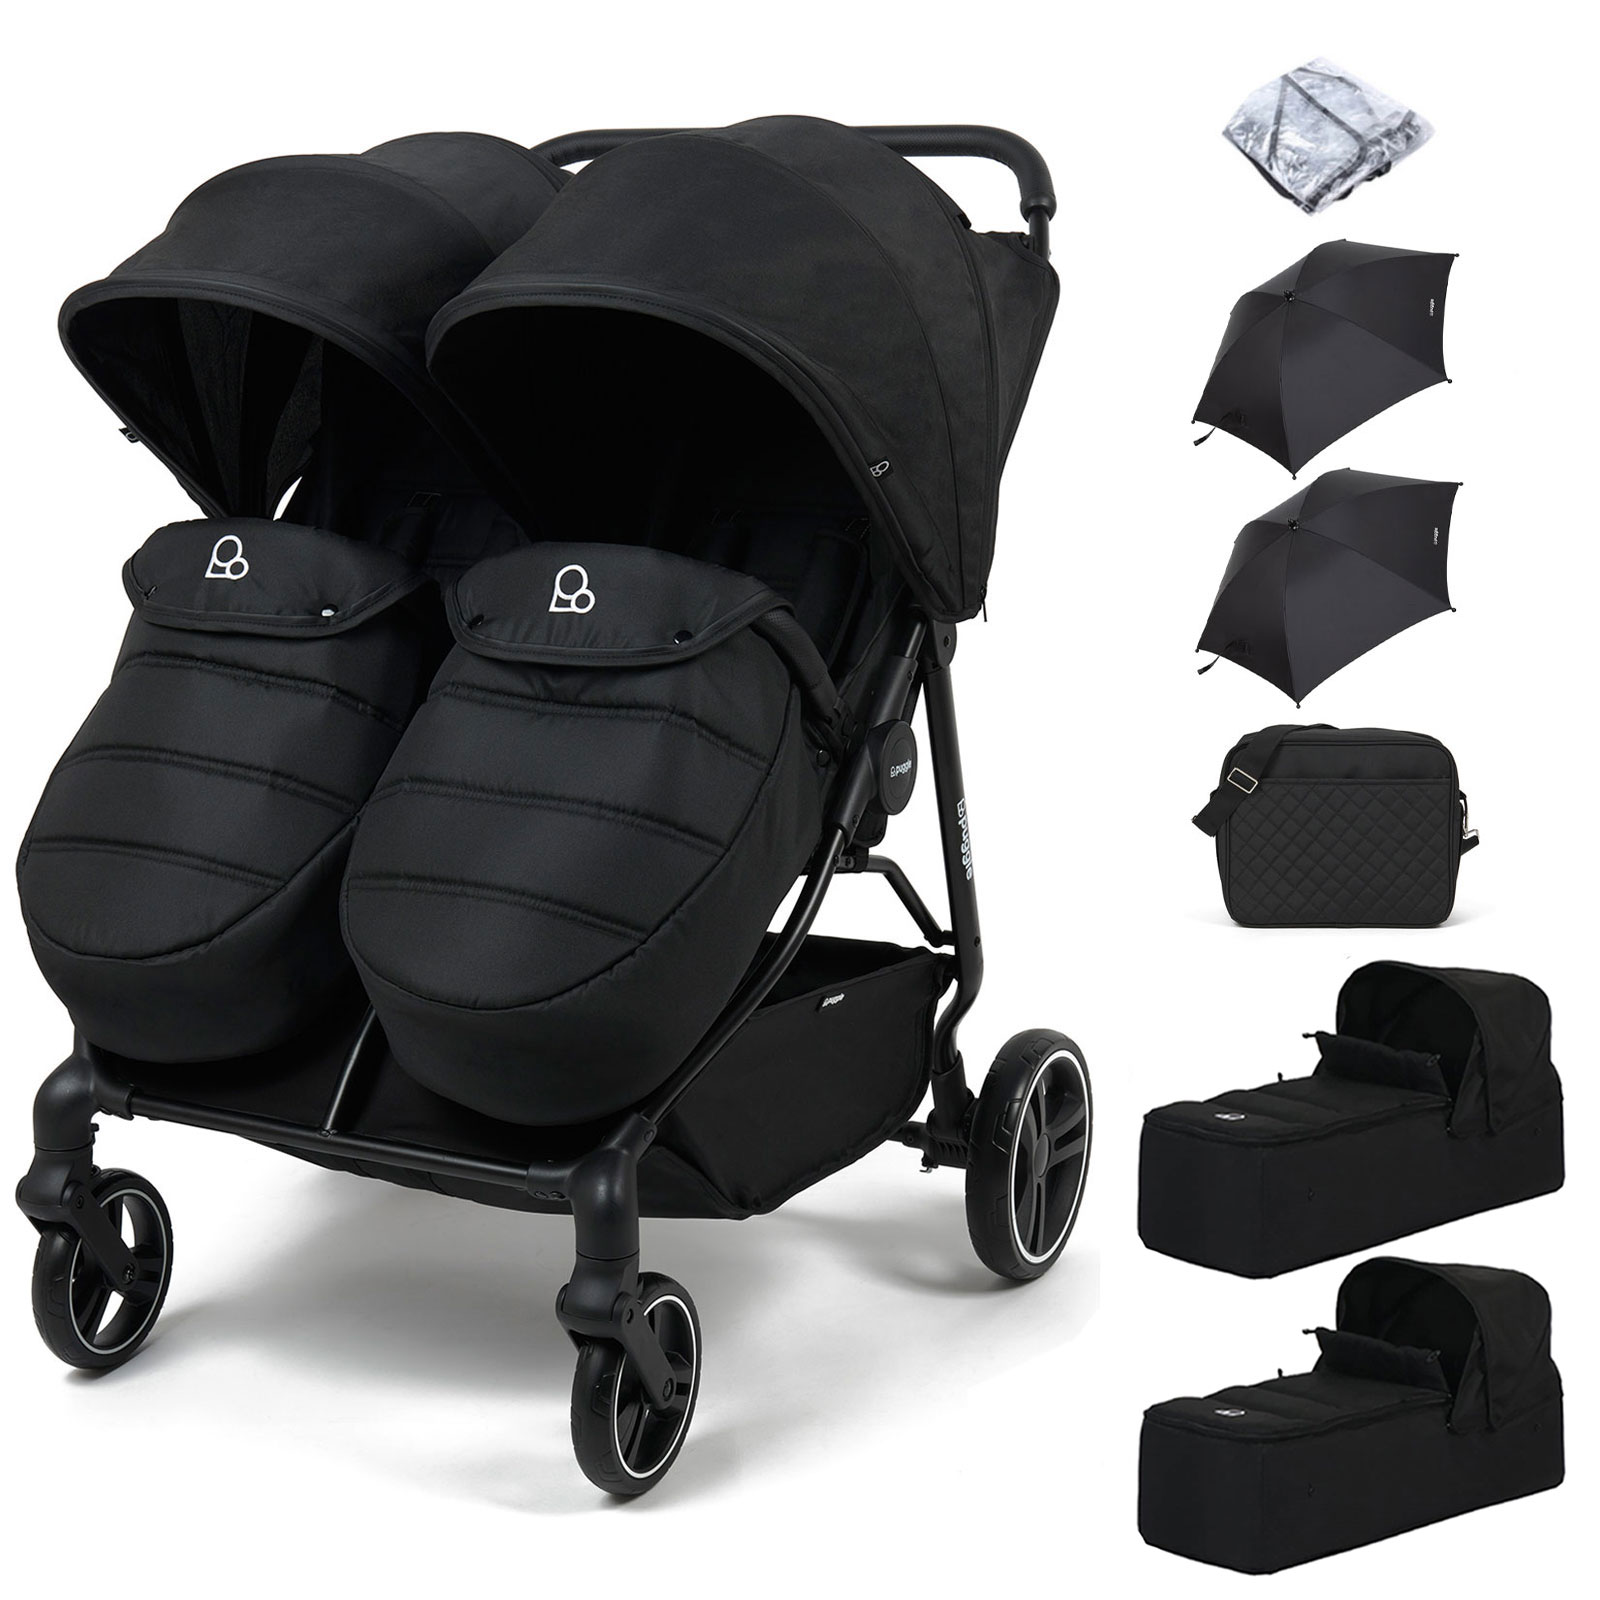 Puggle Urban City Easyfold Twin Pushchair with Footmuff, 2 Carrycots, 2 Parasols & Changing Bag - Storm Black